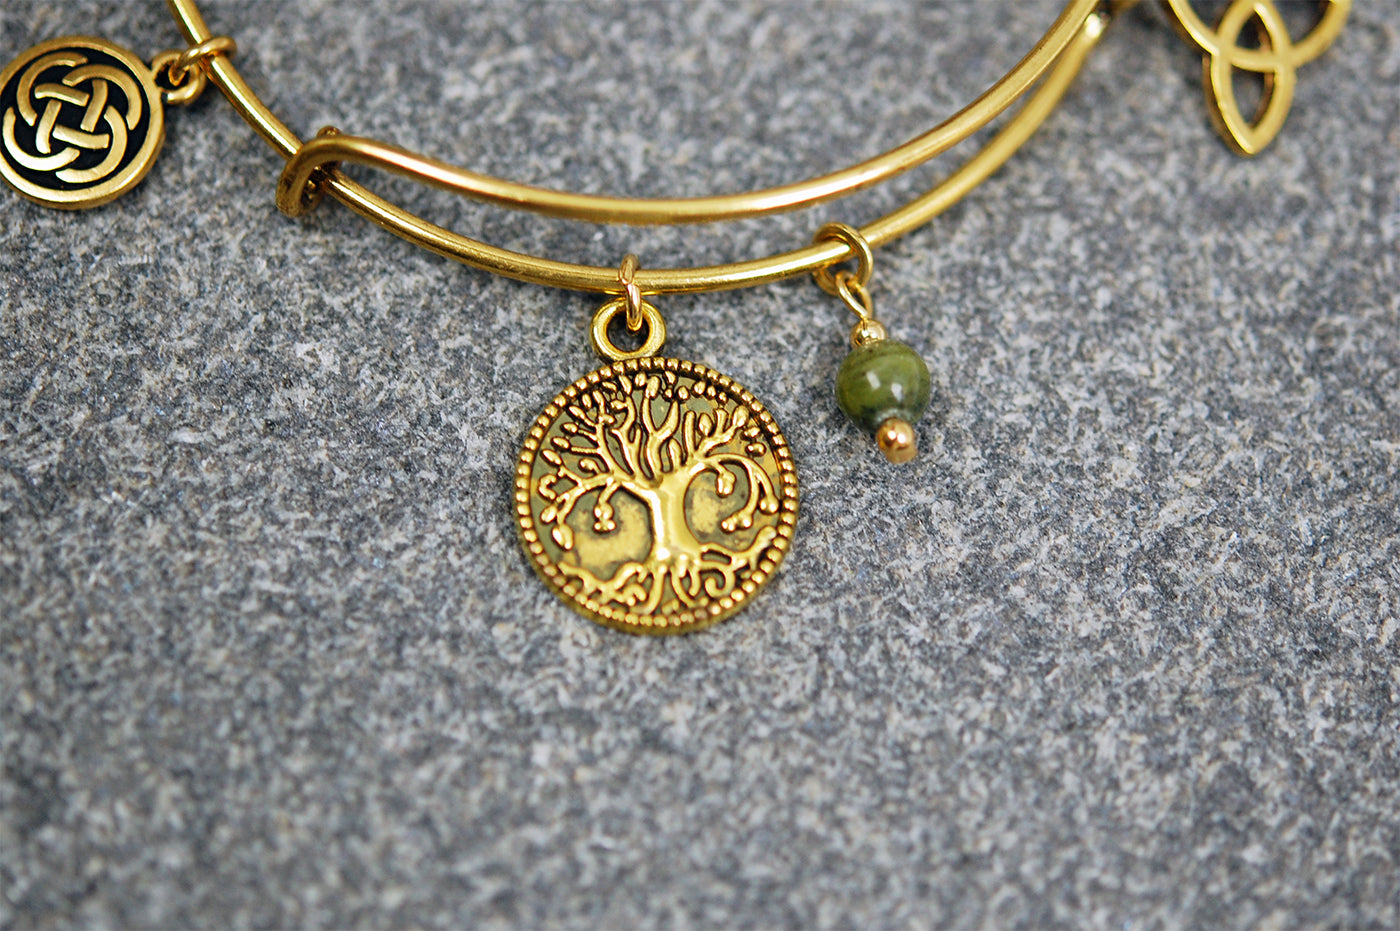 Connemara Marble Wire Bracelet with Tree of Life